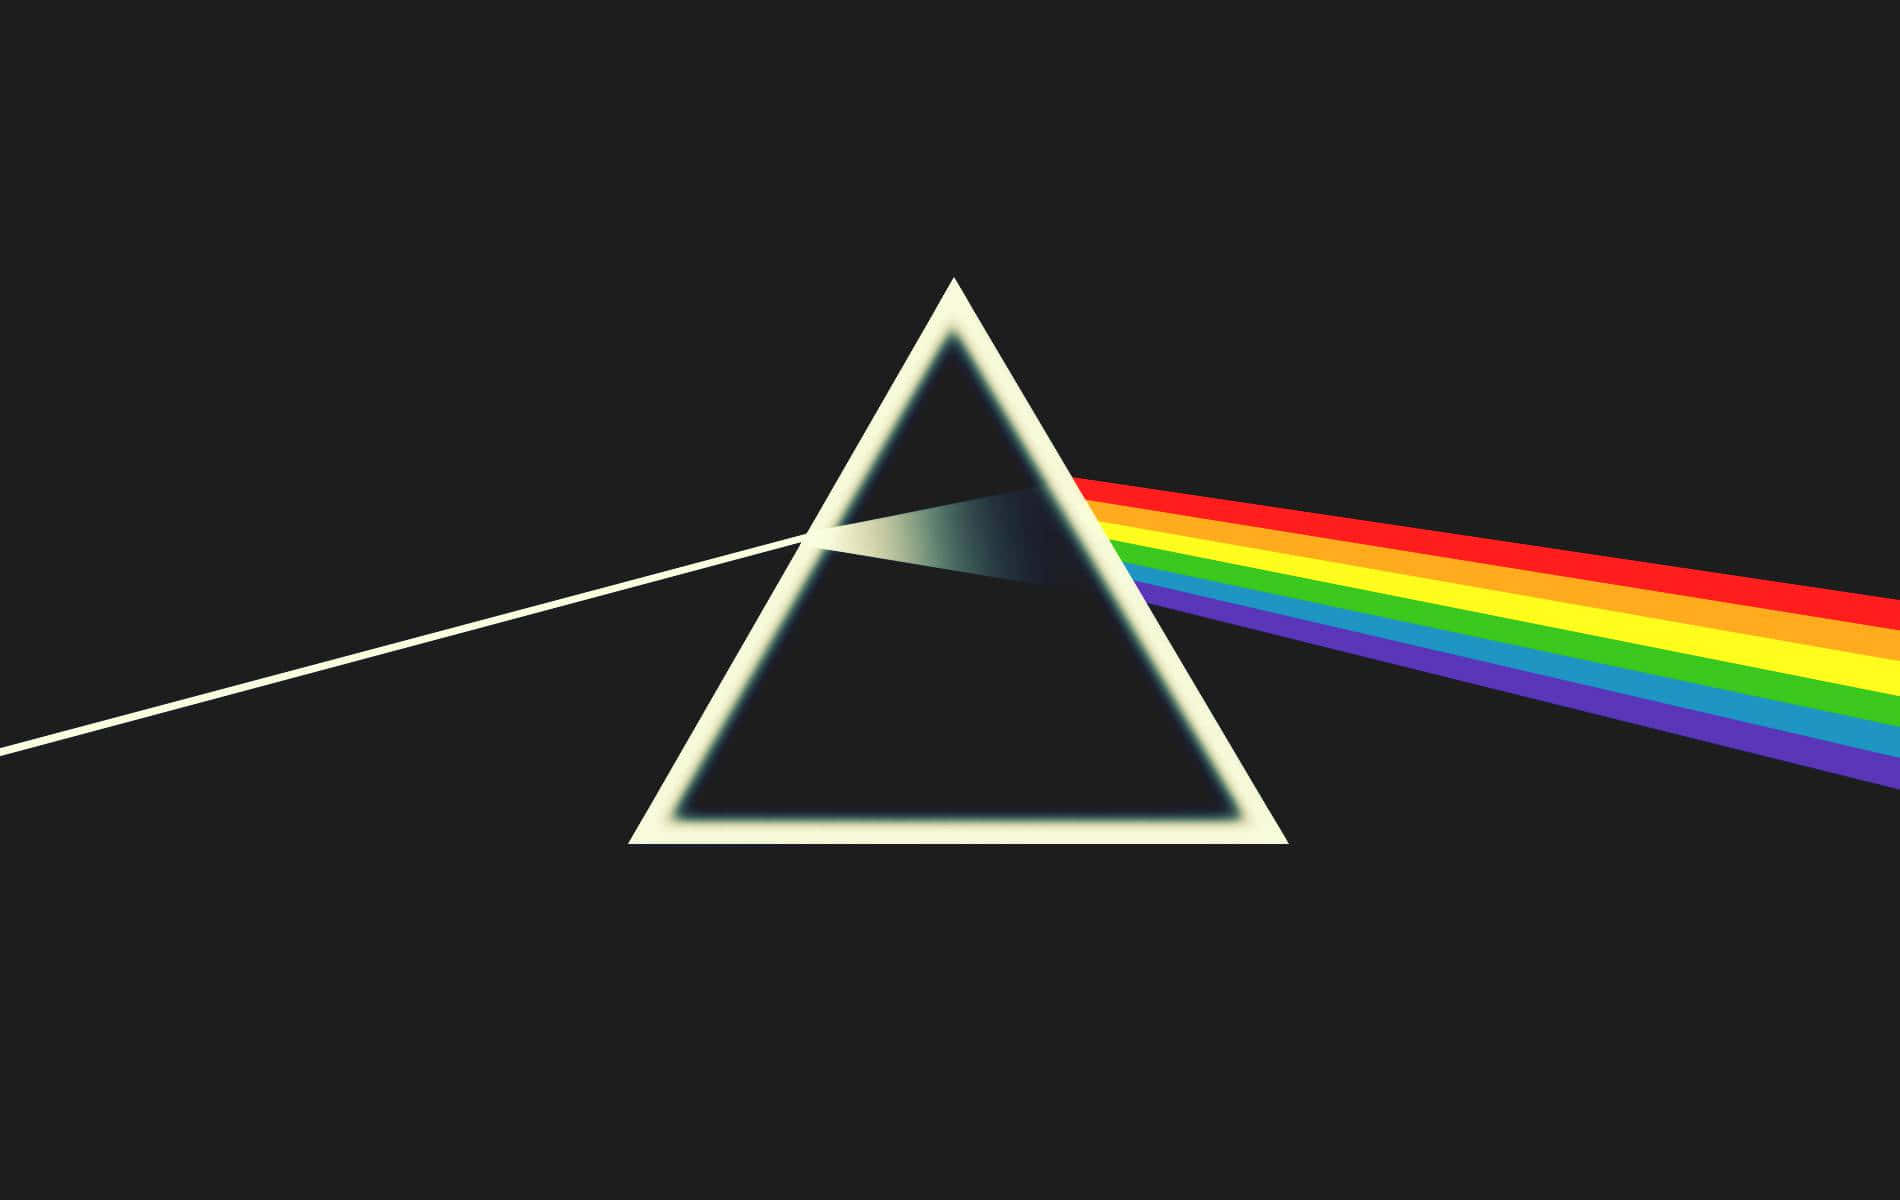 The Iconic Album Artwork for Pink Floyd's Classic LP, Dark Side of the Moon Wallpaper